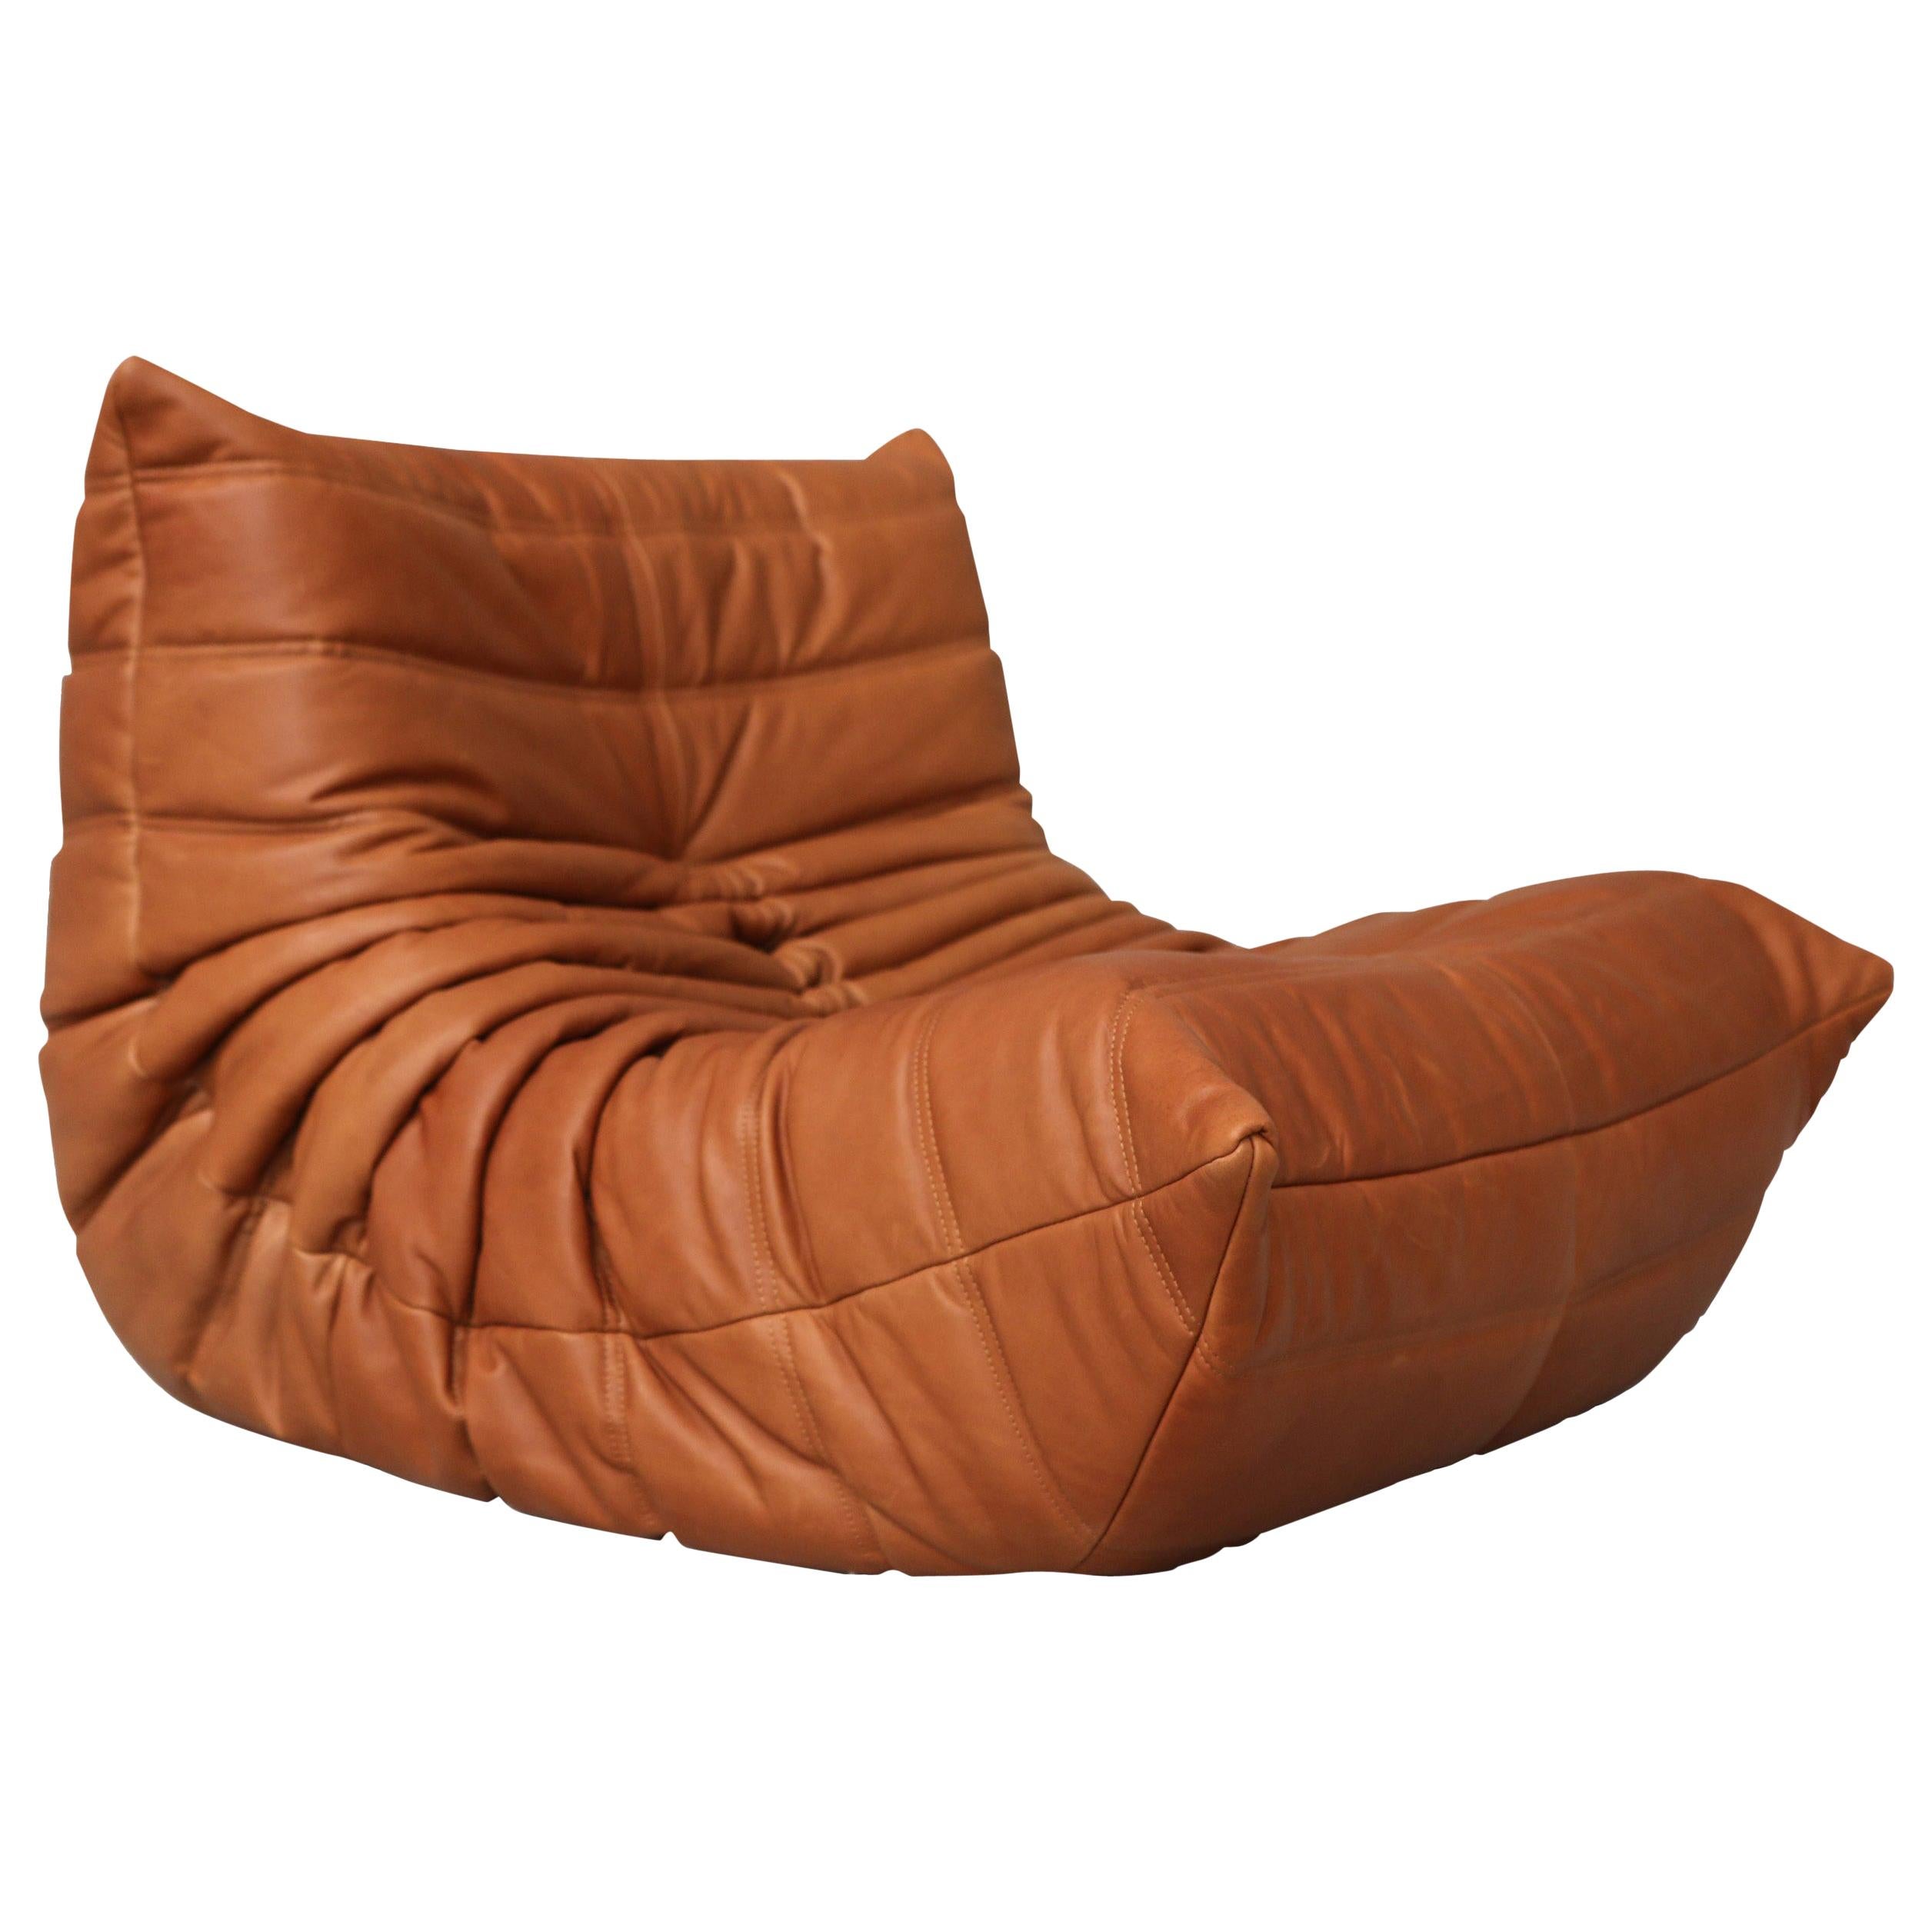 CERTIFIED Ligne Roset TOGO Fireside in Natural Cognac Leather, DIAMOND QUALITY For Sale